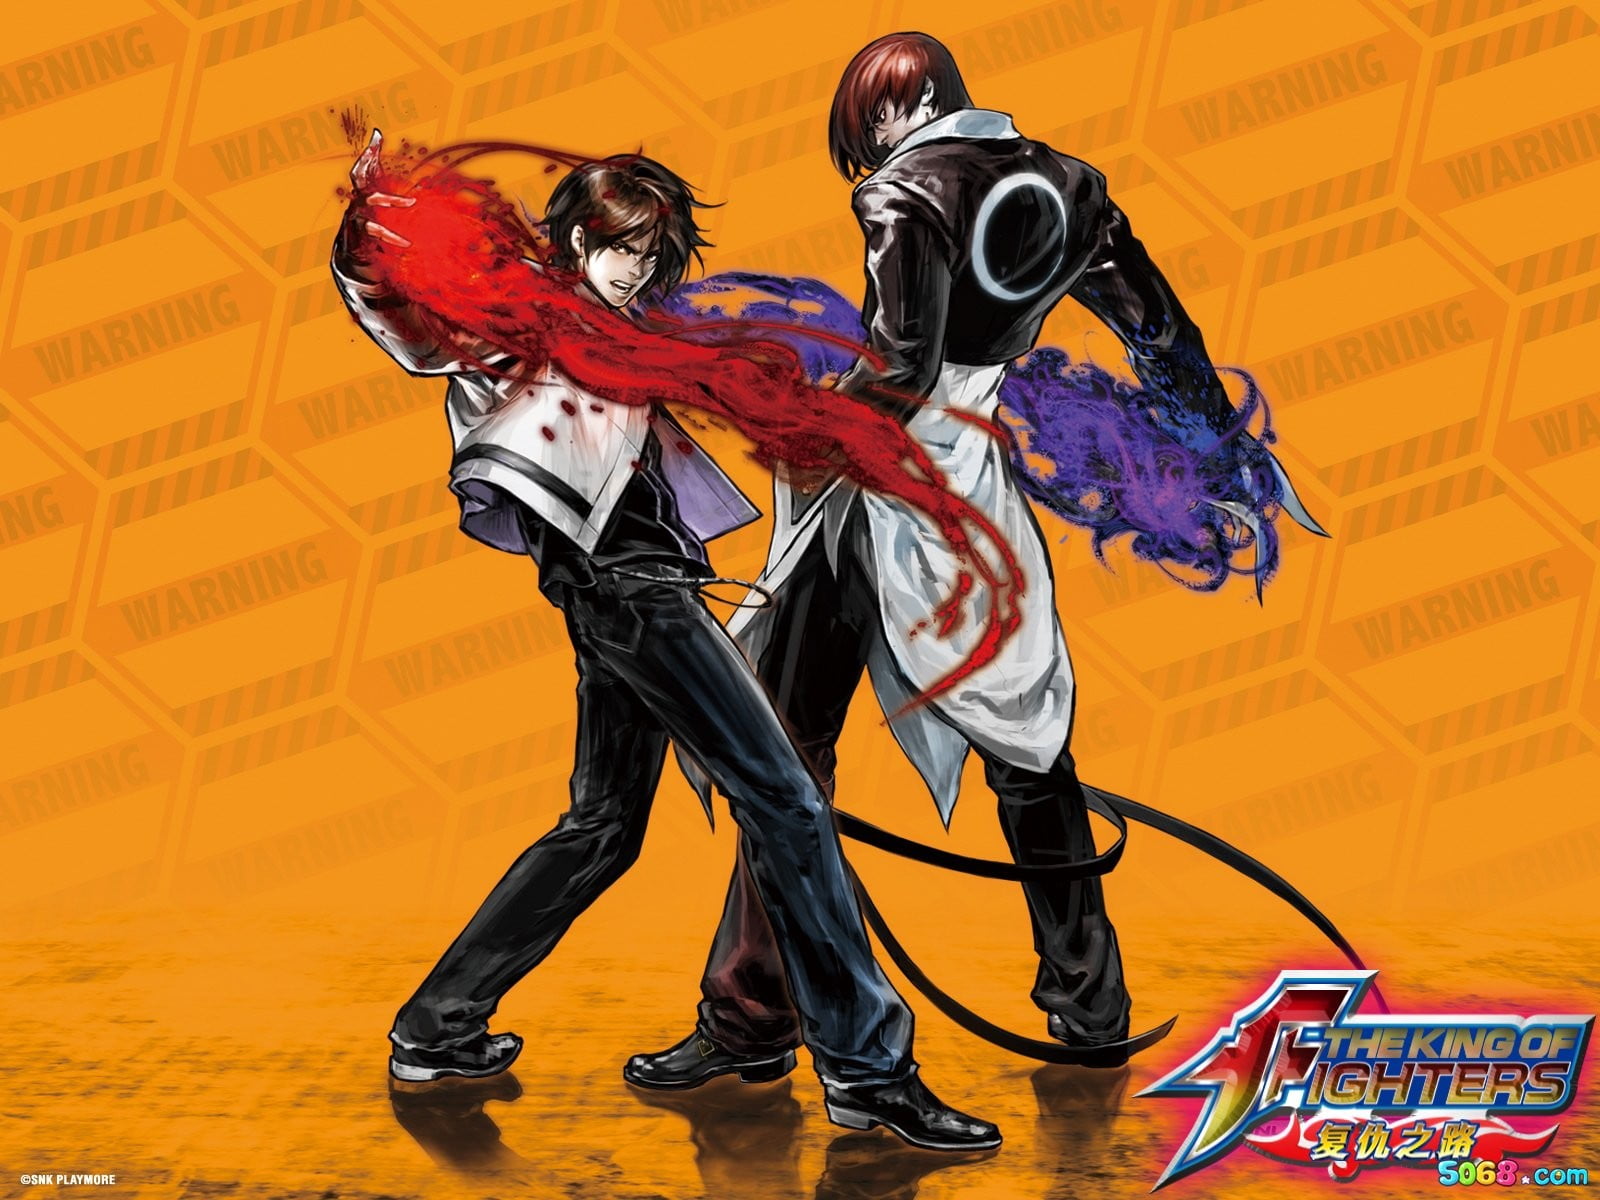 The King of Fighters graphic wallpaper, King of Fighters, Kyo Kusanagi, Iori Yagami, video games